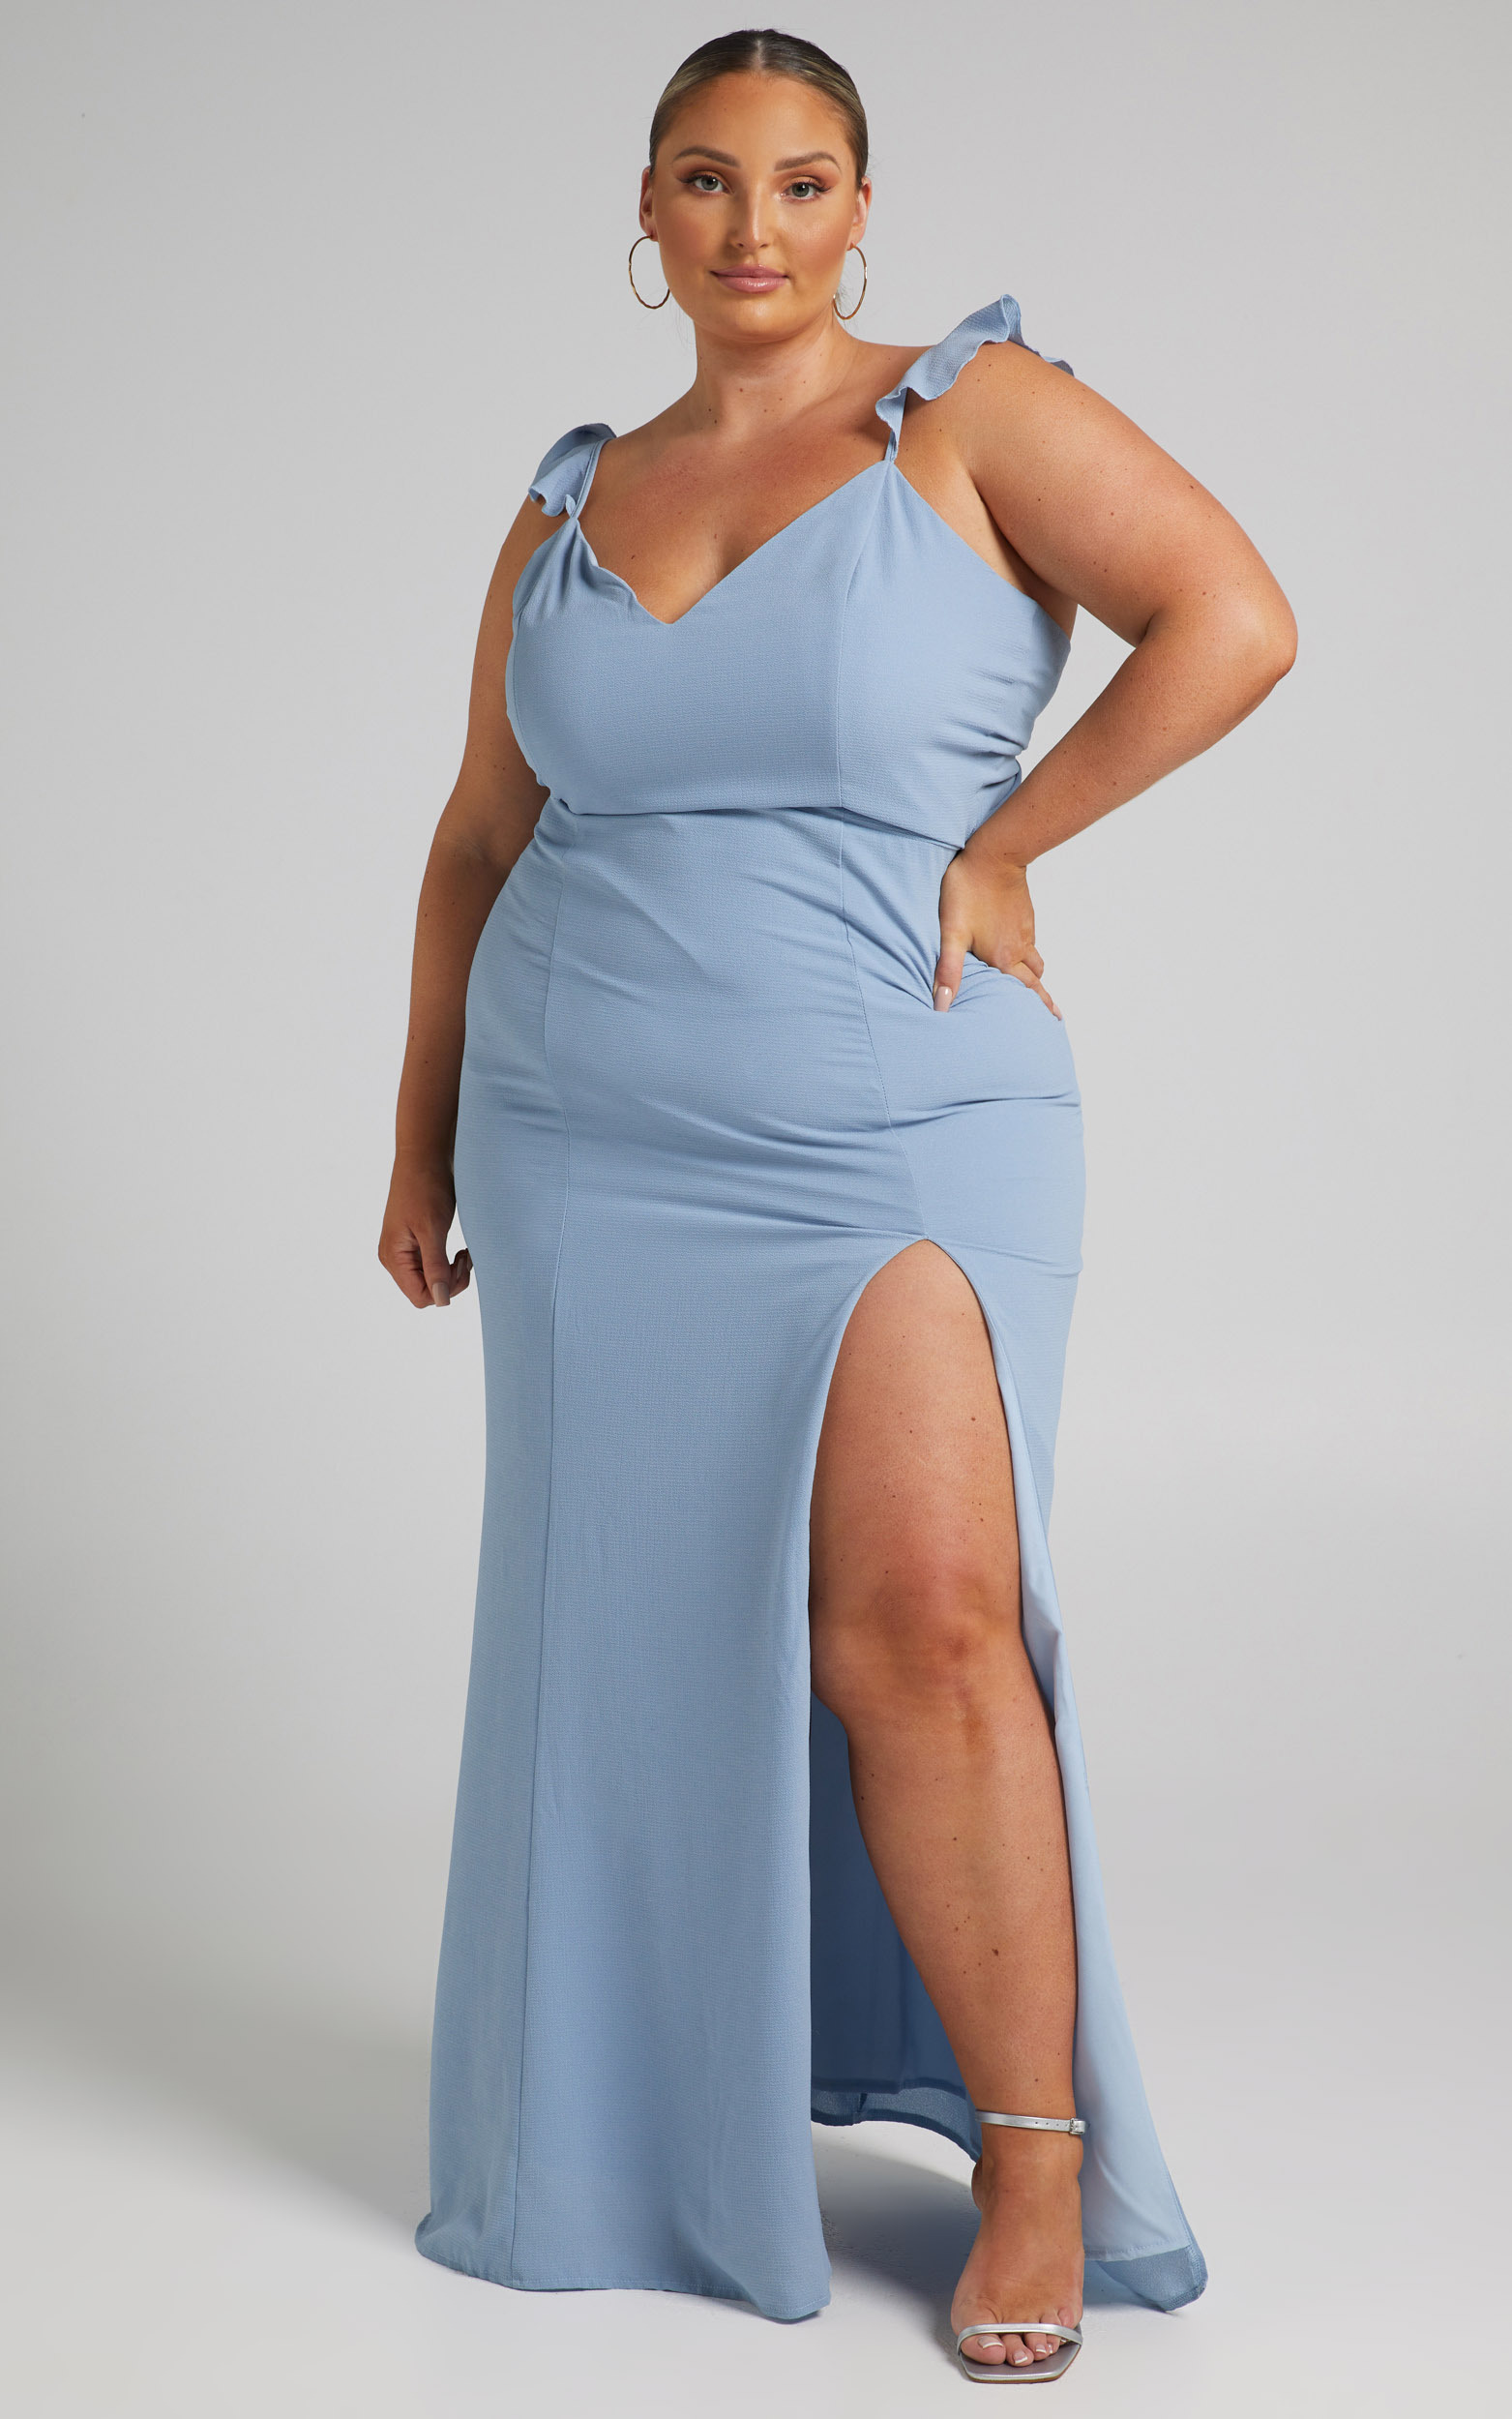 More Than This Maxi Dress in Light Blue ...